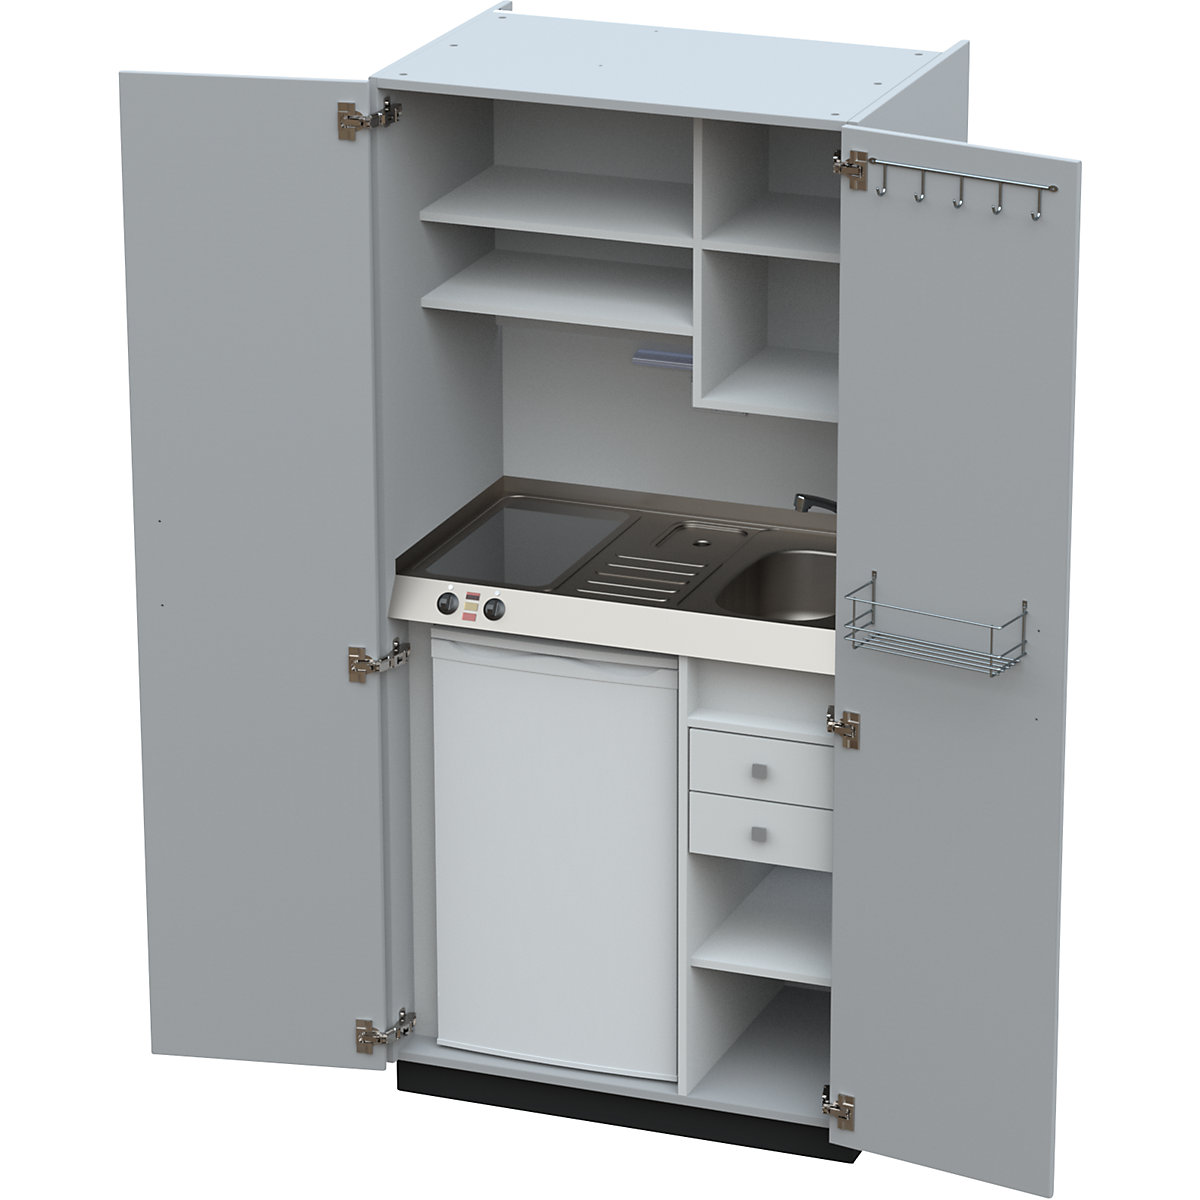 Kitchen unit with hinged doors, 2 glass ceramic hotplates, basin at right, grey, 1956 x 900 x 650 mm-6